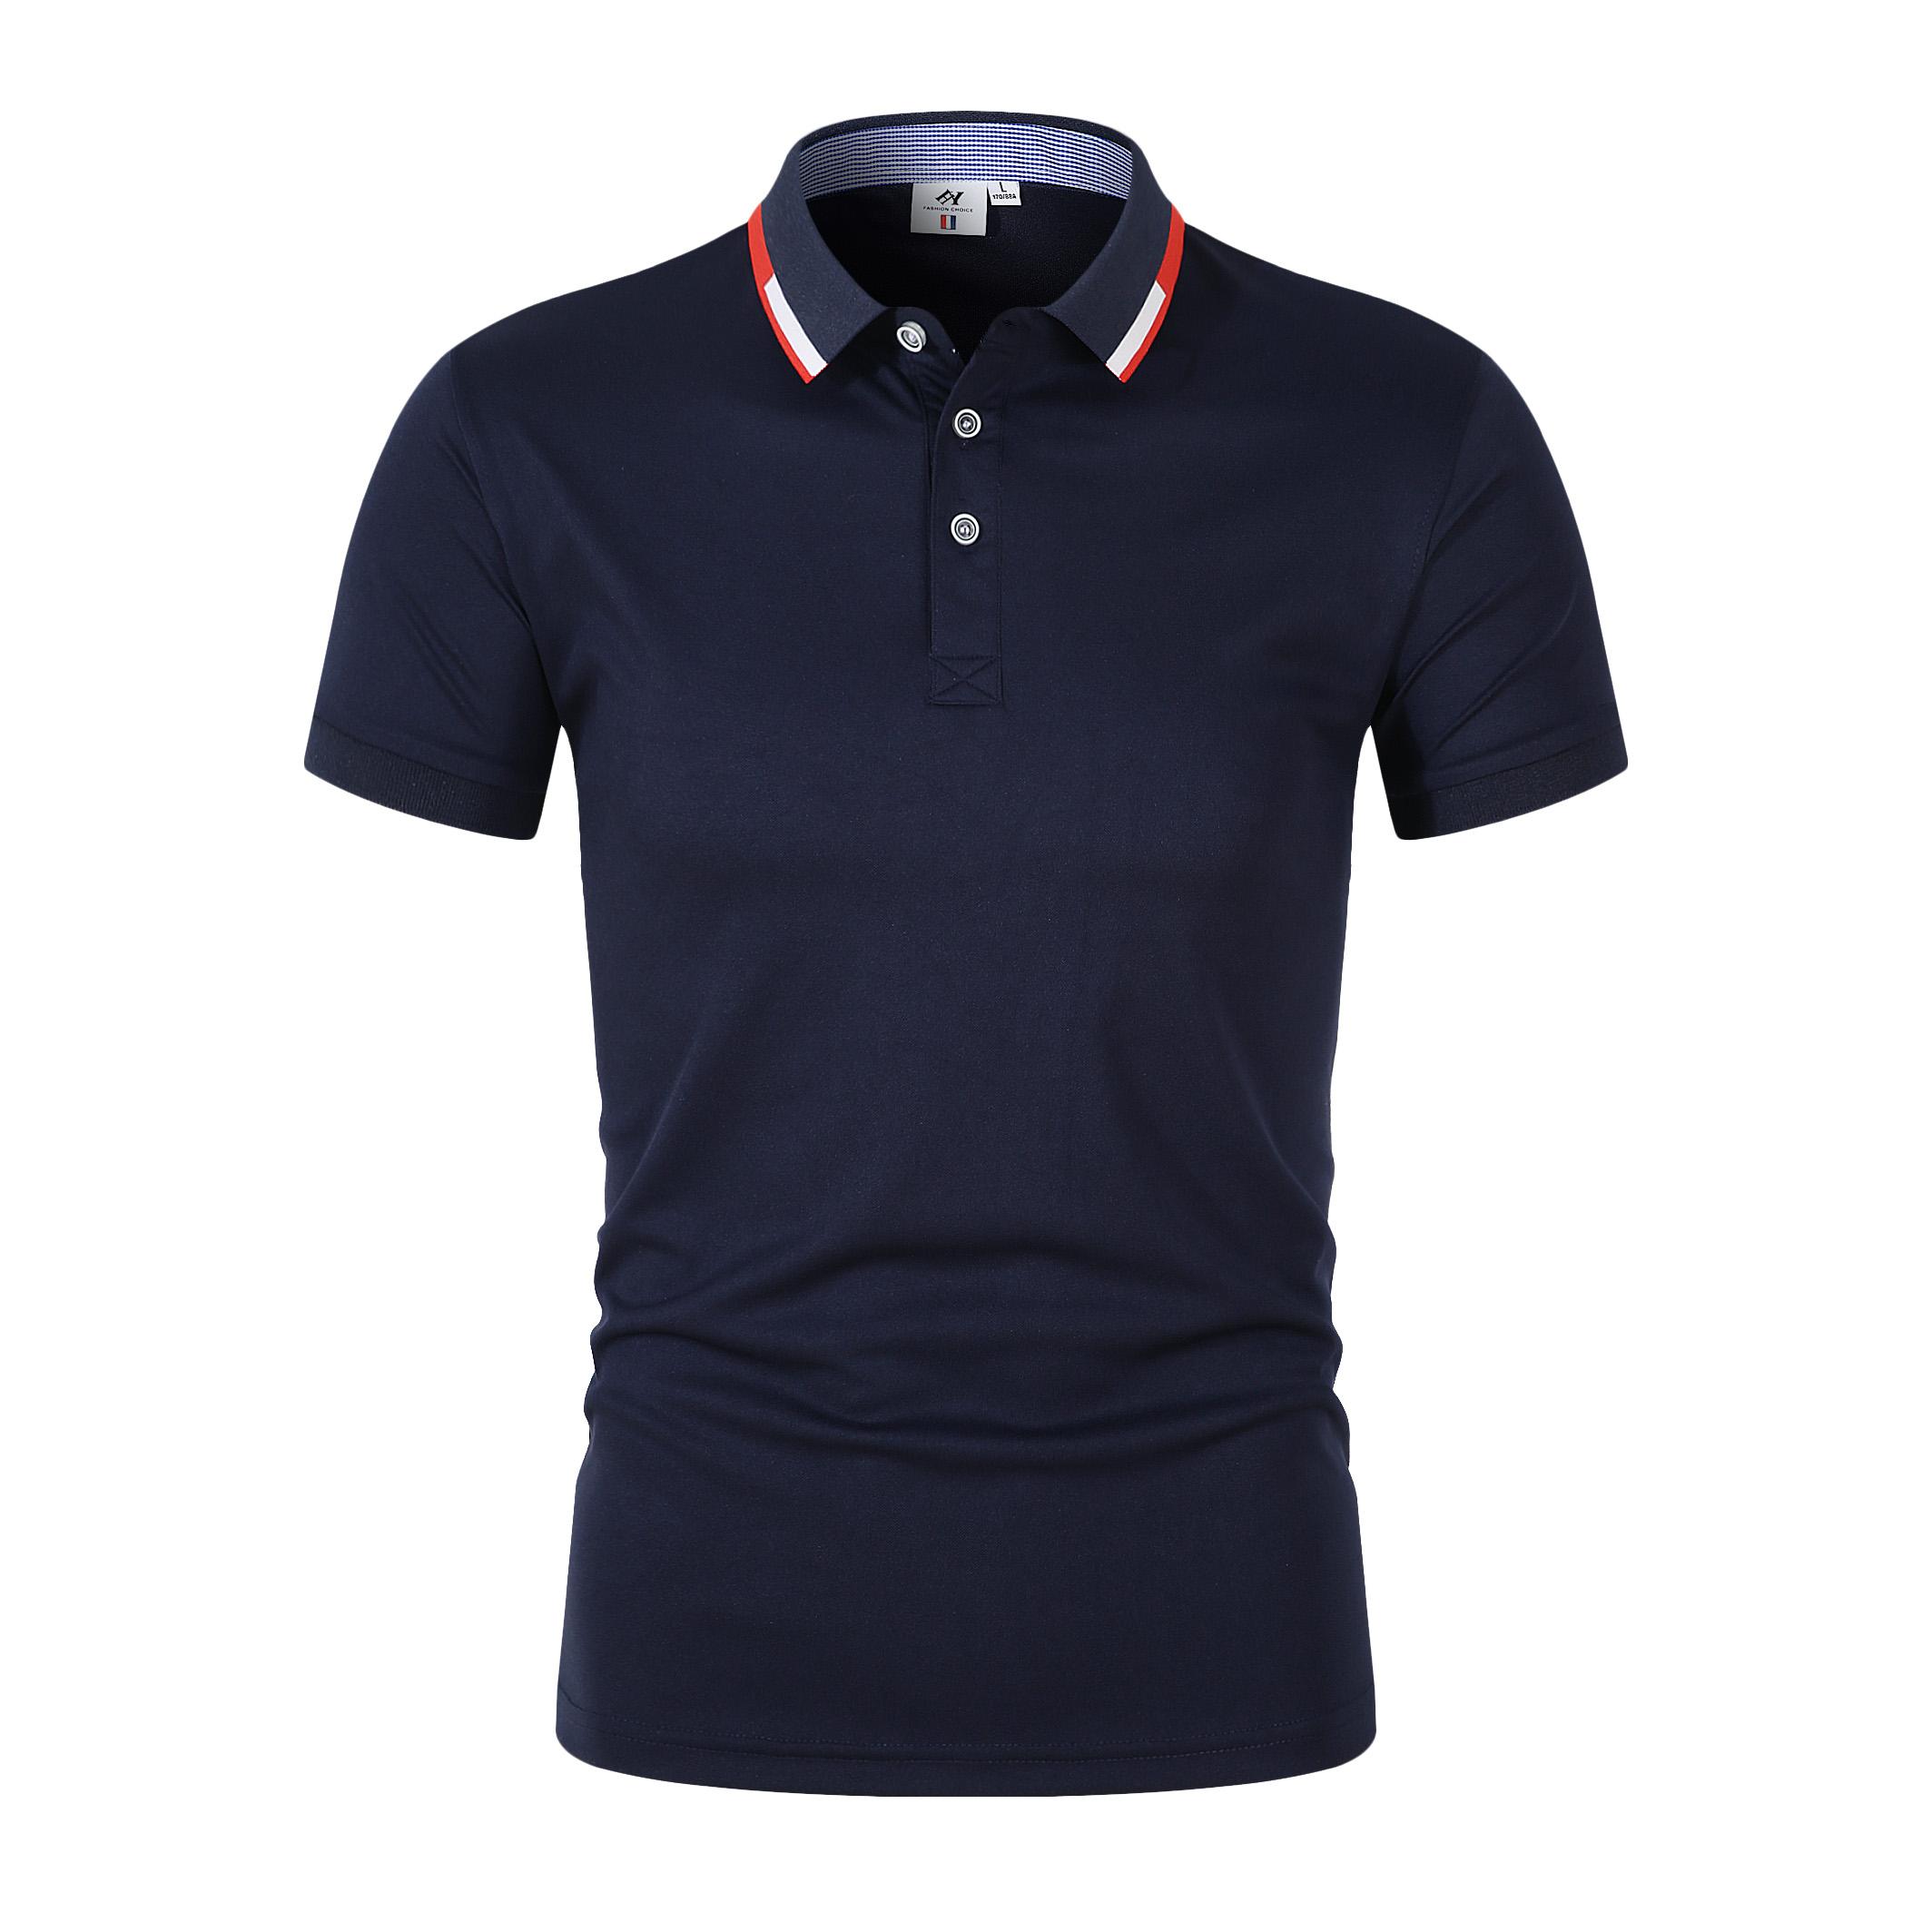 Aee-MaMoo Zomer Hoge Kwaliteit Nieuwe Mannen Polo's High-end Business Mannen Vrouwen Korte Mouw Polo Casual Revers Shirt Ademende Mannen Polo Shirt